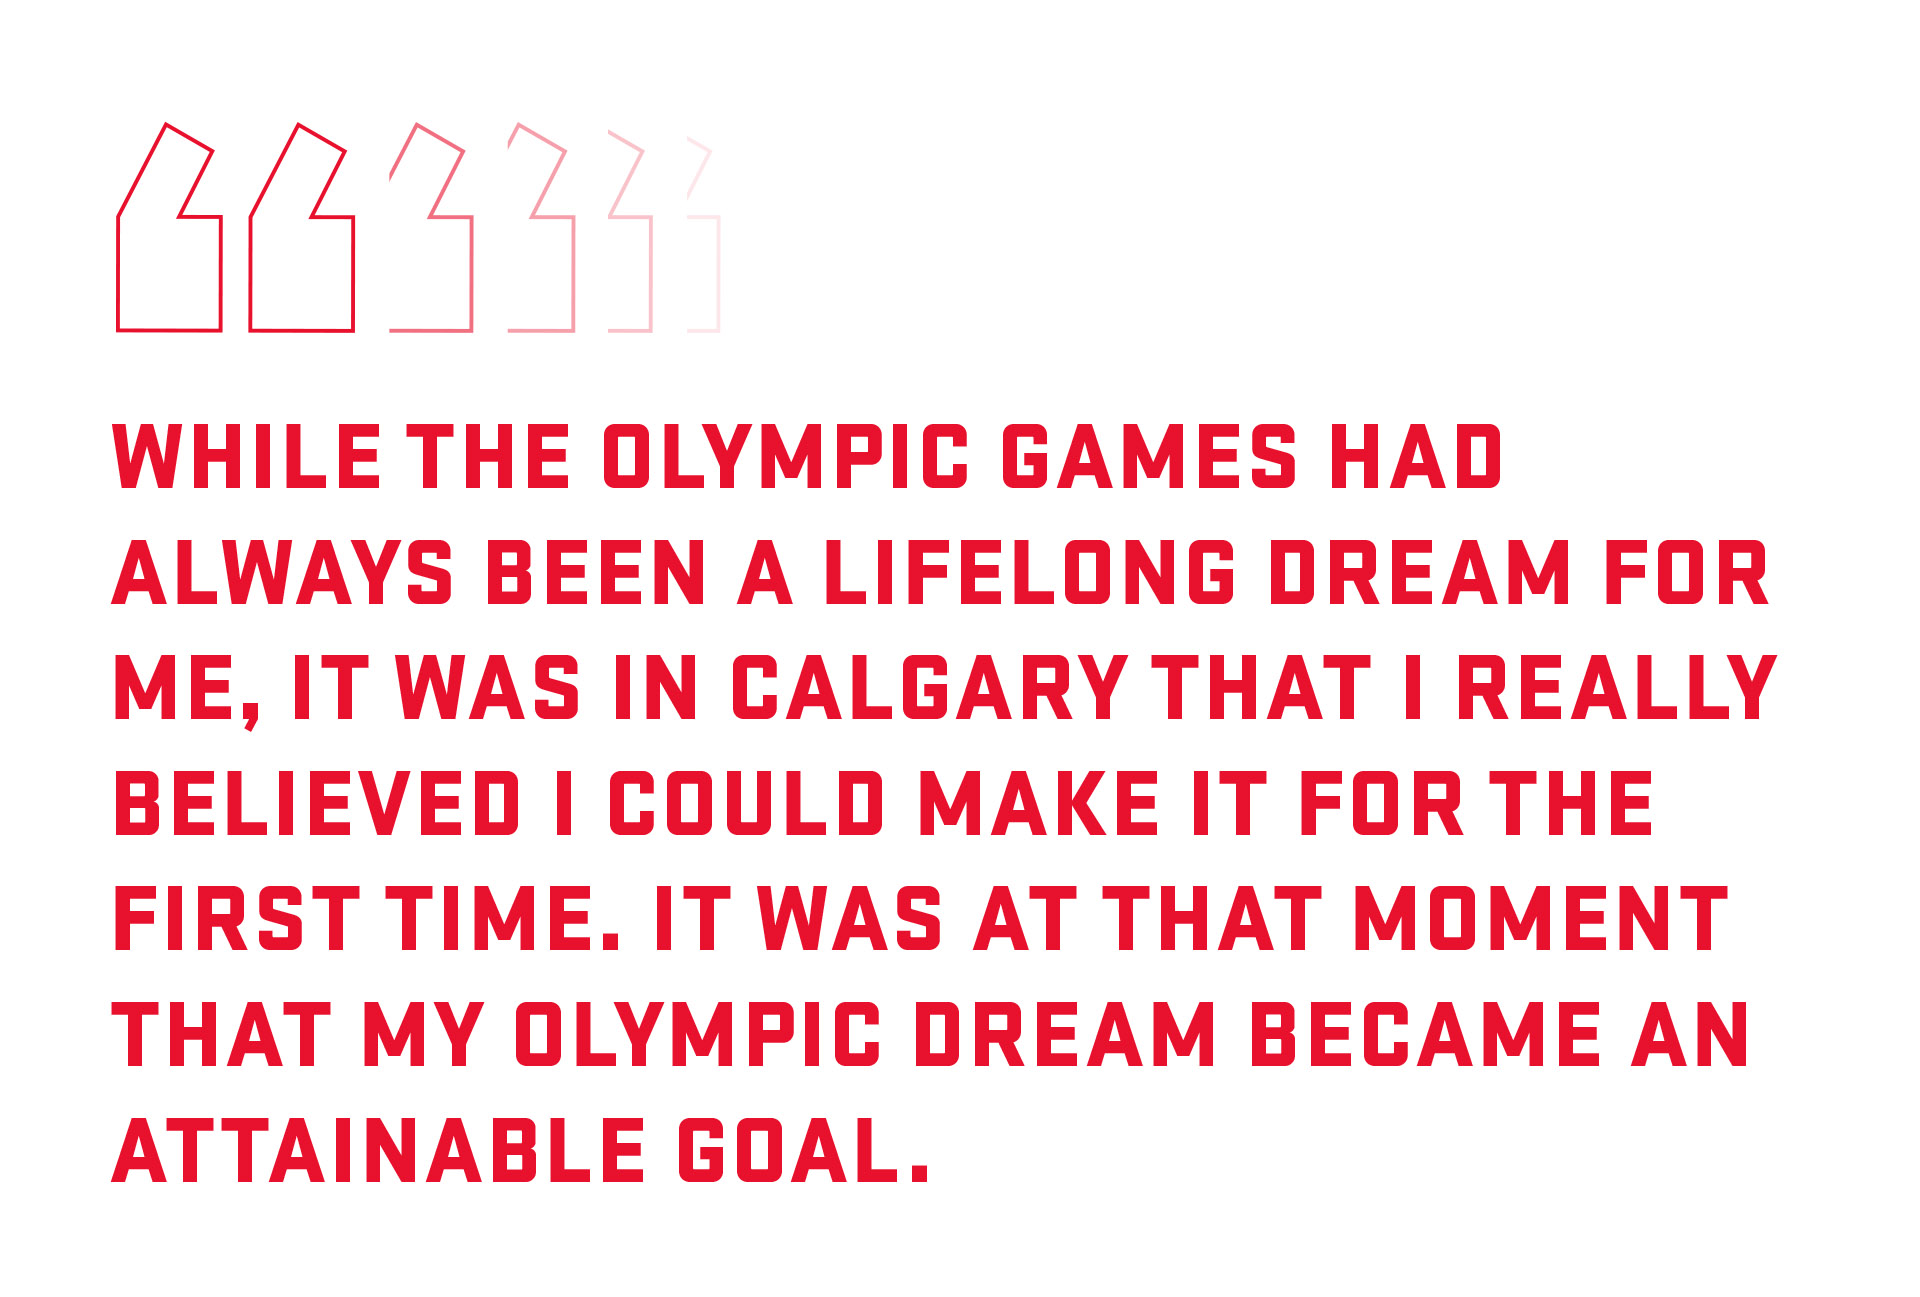 Pull quote: While the Olympic Games had always been a lifelong dream for me, it was in Calgary that I really believed I could make it for the first time. 